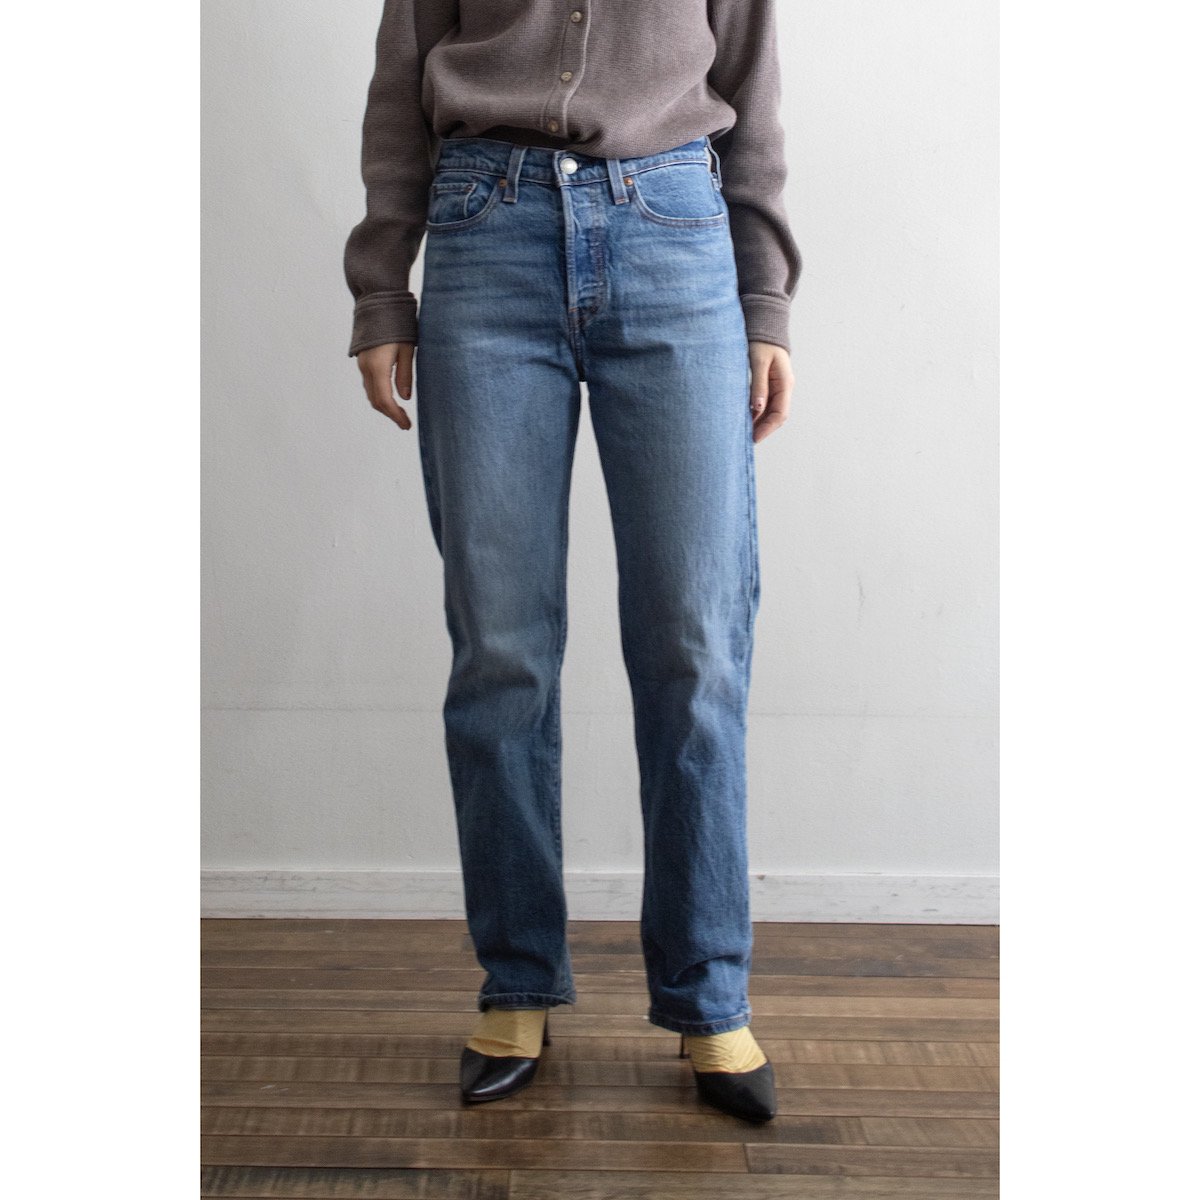 Levi's Wedgie Fit Jeans - Shop the Iconic Wedgie Jean